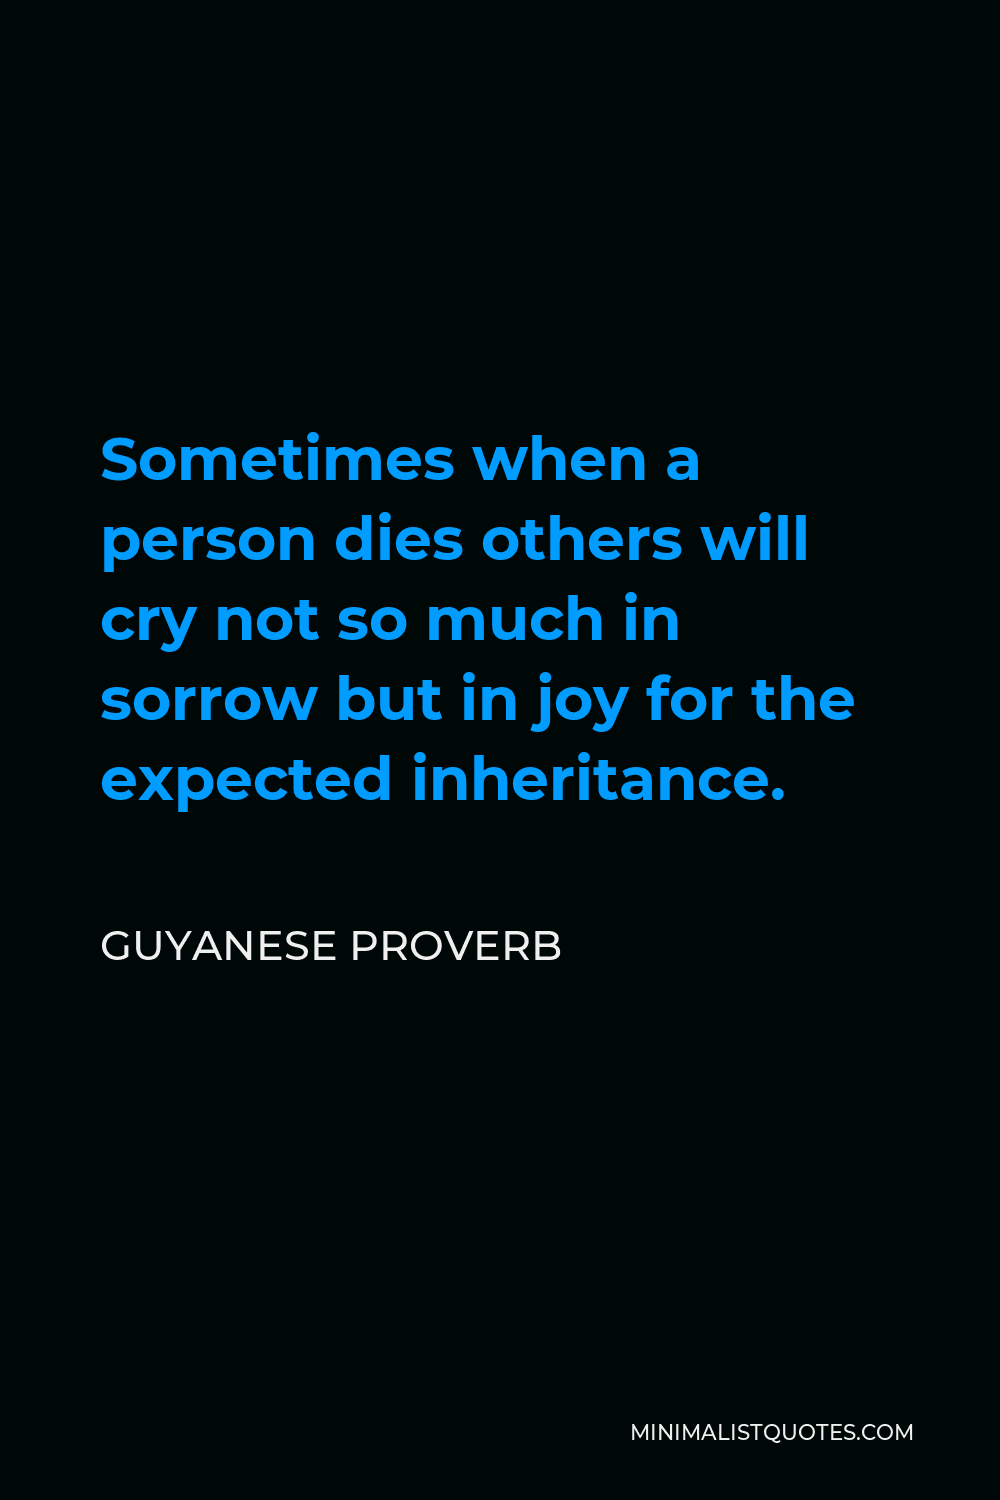 Guyanese Proverb Quote - Sometimes when a person dies others will cry not so much in sorrow but in joy for the expected inheritance.